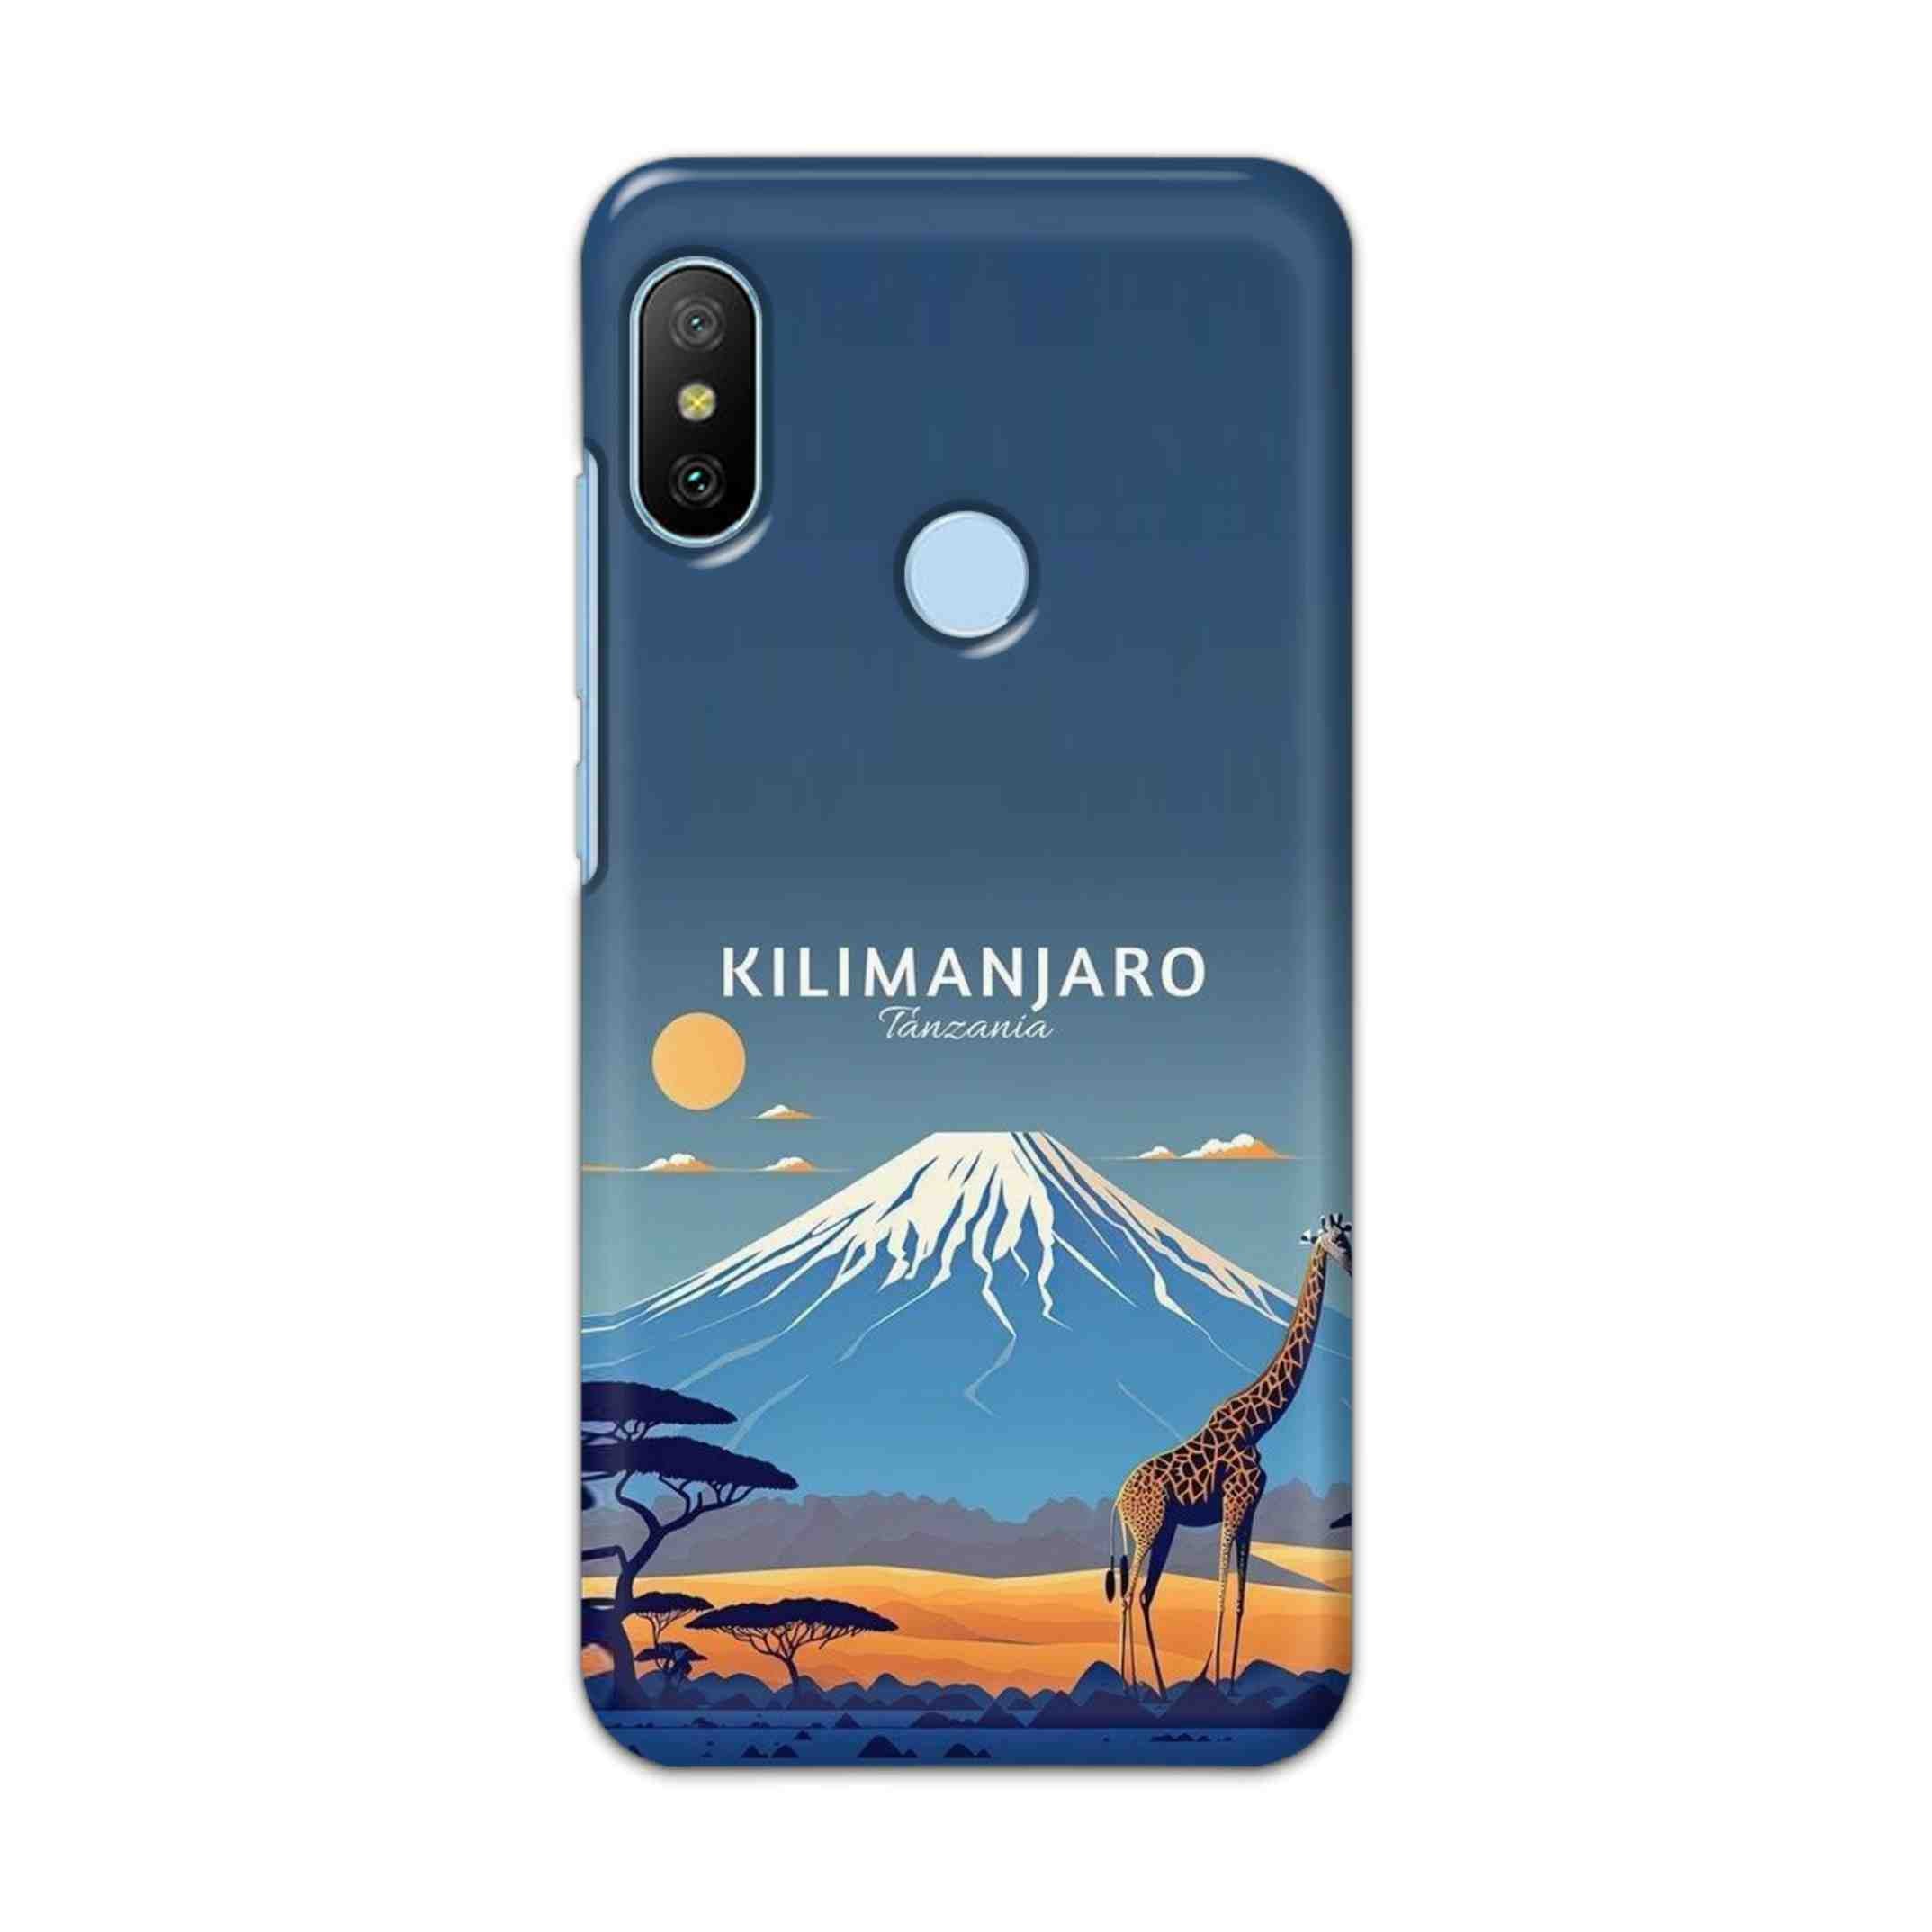 Buy Kilimanjaro Hard Back Mobile Phone Case/Cover For Xiaomi A2 / 6X Online